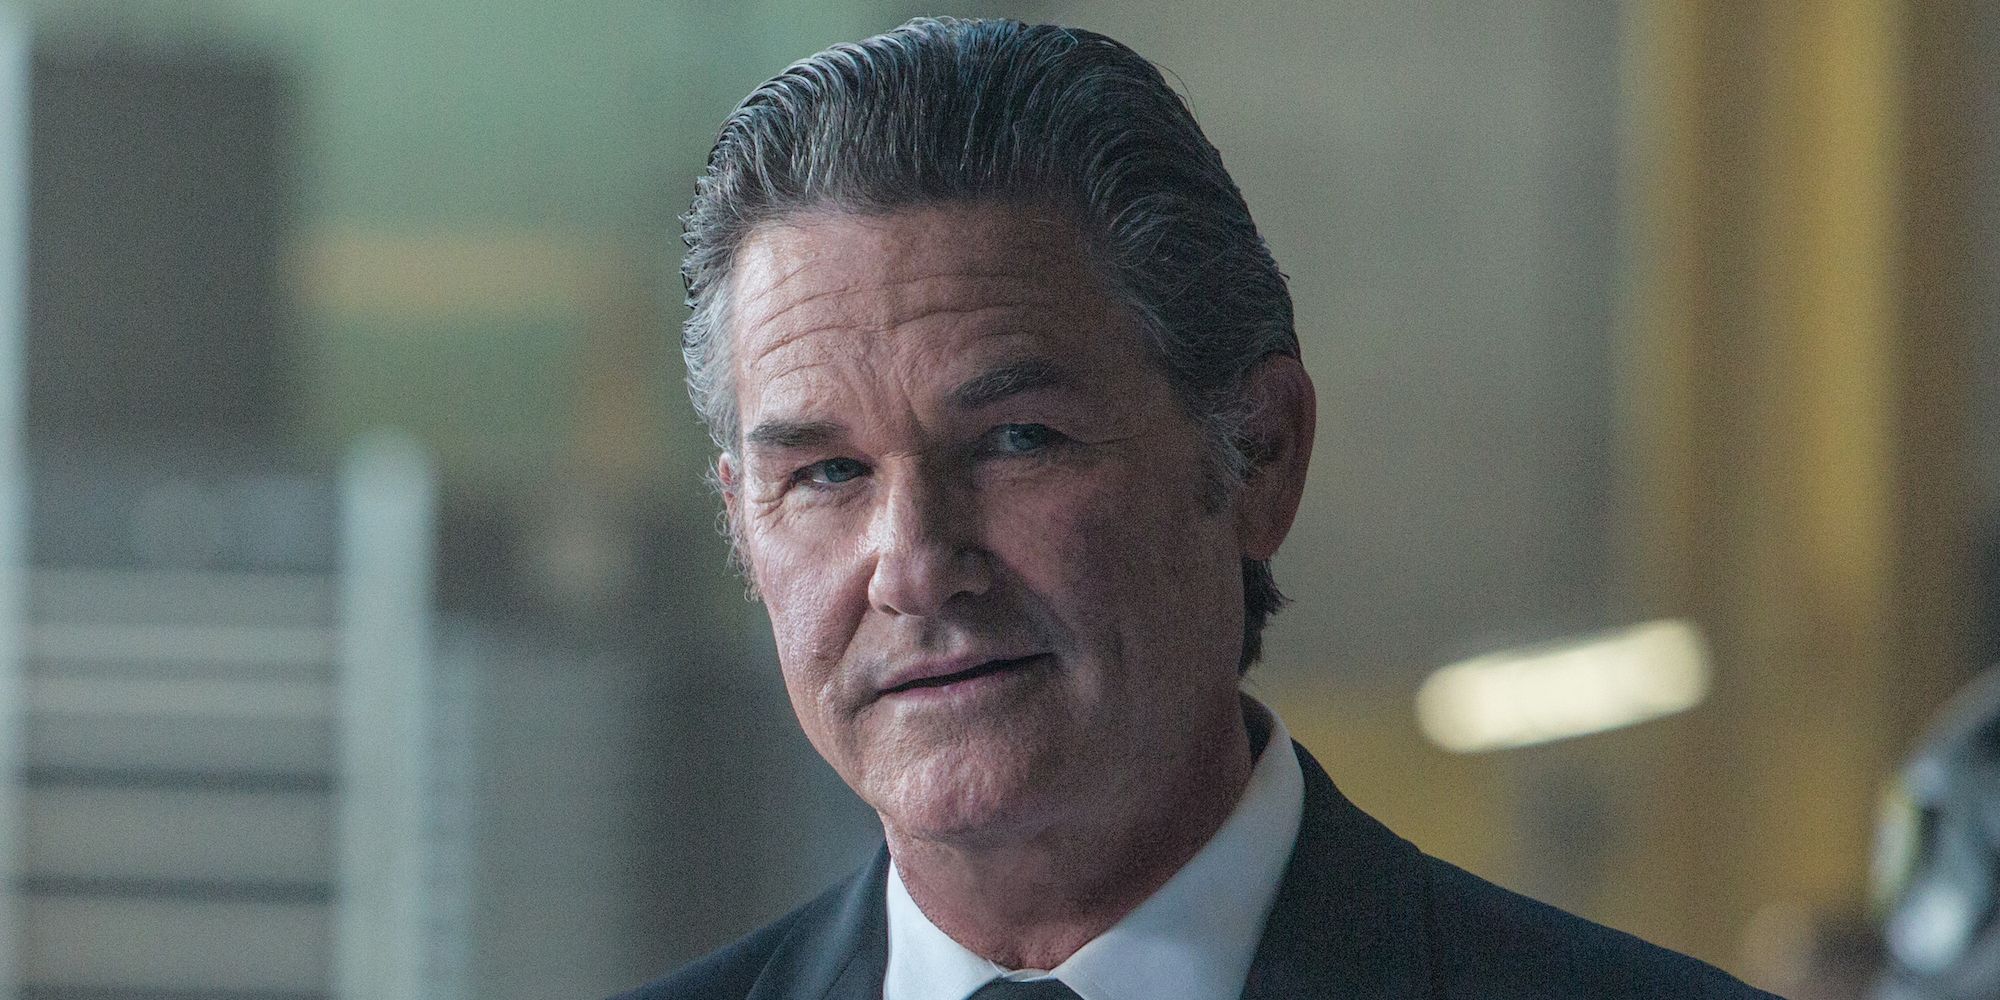 Kurt Russell in The Fate of the Furious